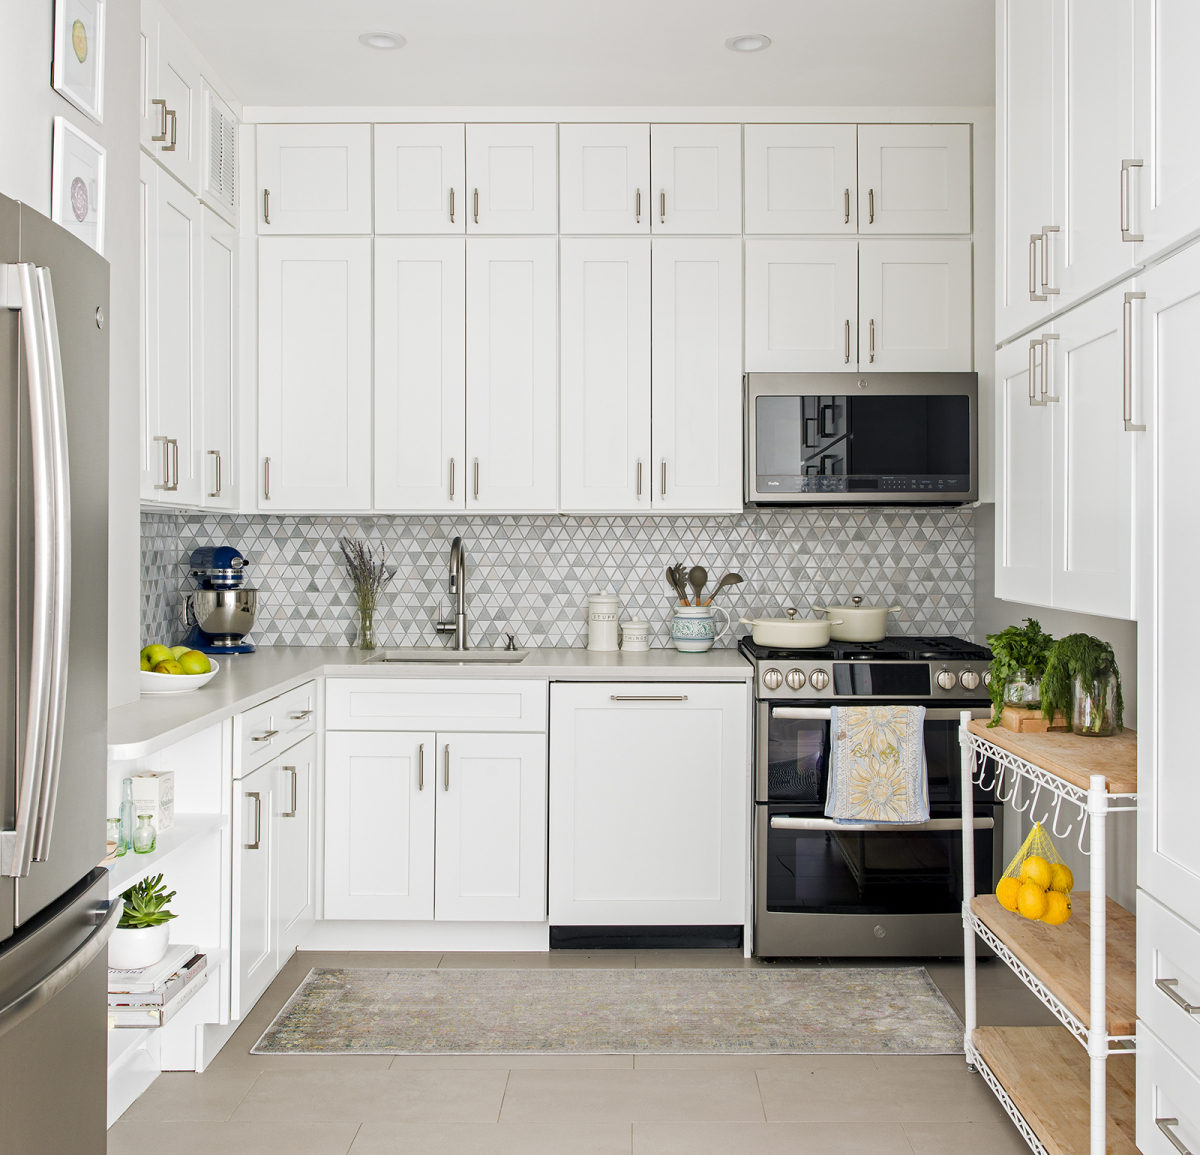 Lincoln Tower Apartment residential interior design renovation by Basicspace. White kitchen cabinetry with mosaic backsplash, light grey counters and matte slate appliances and butcher block cart.